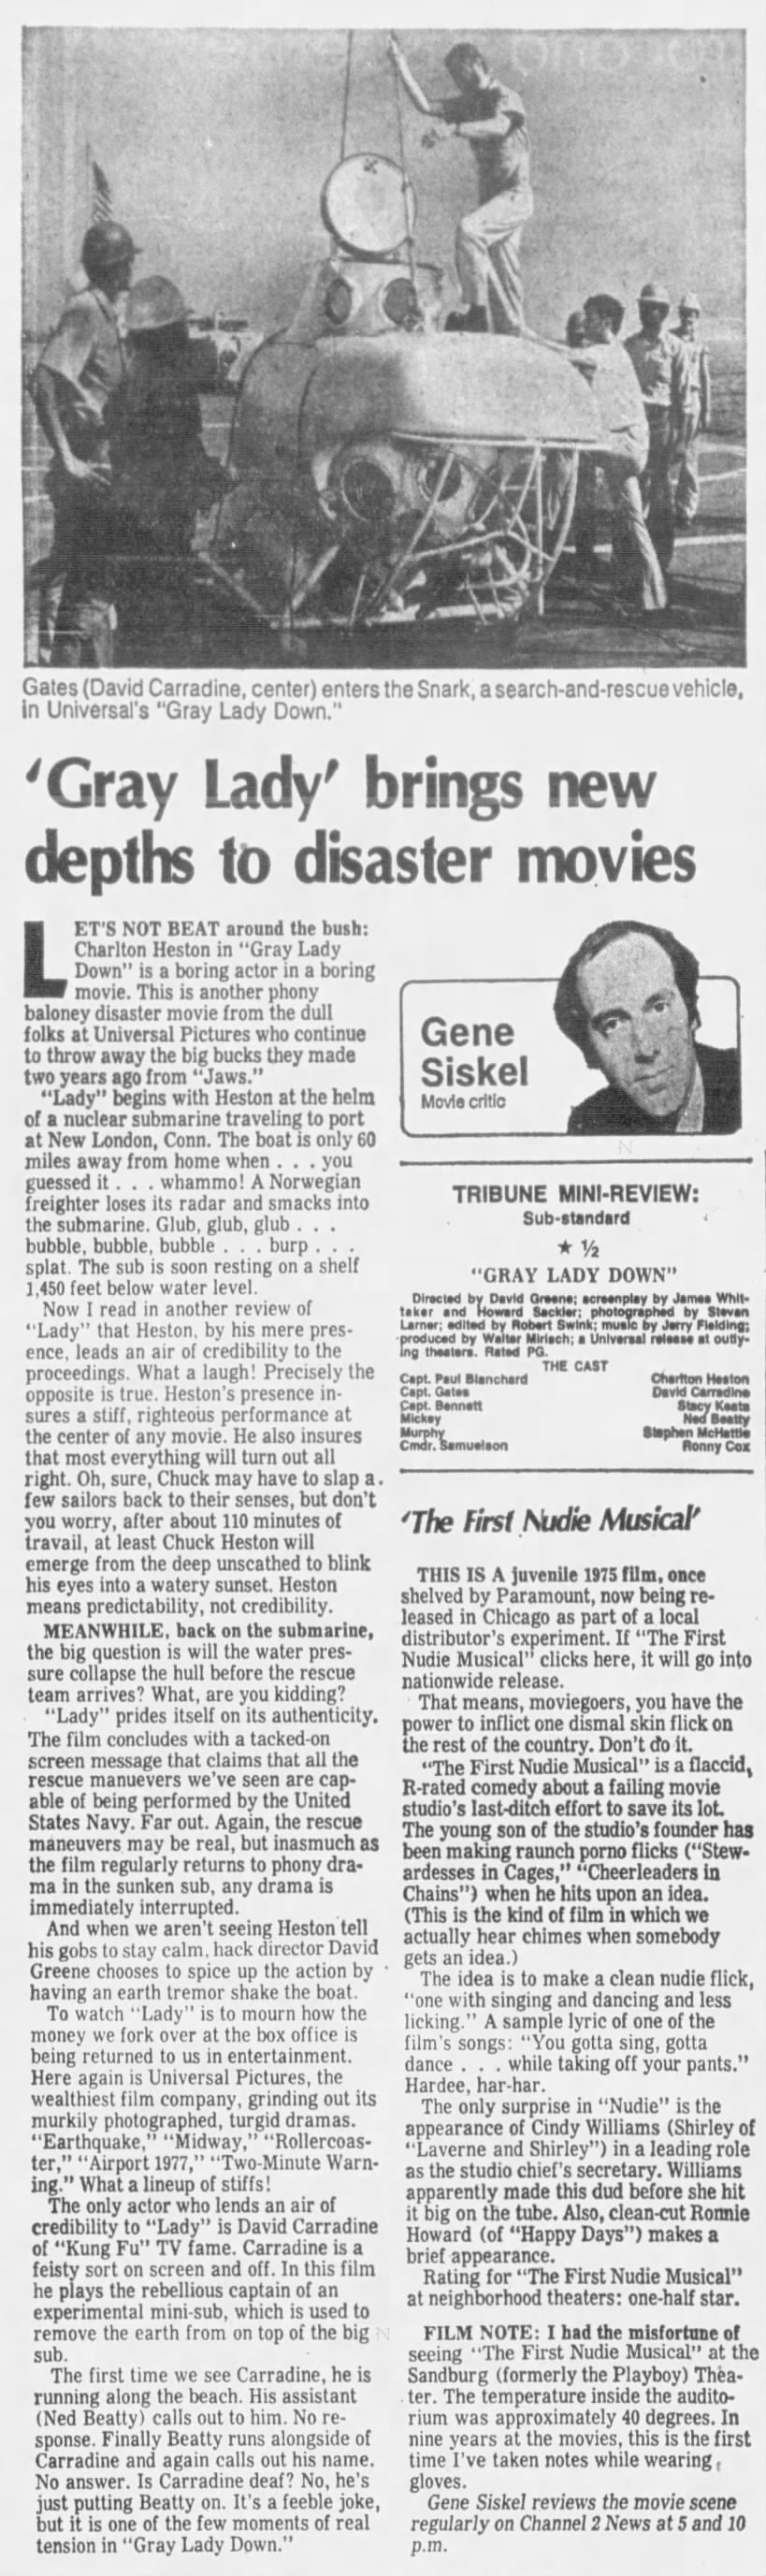 Gene Siskel Movie Review—GRAY LADY DOWN/THE FIRST NUDIE MUSICAL (03-16-78)